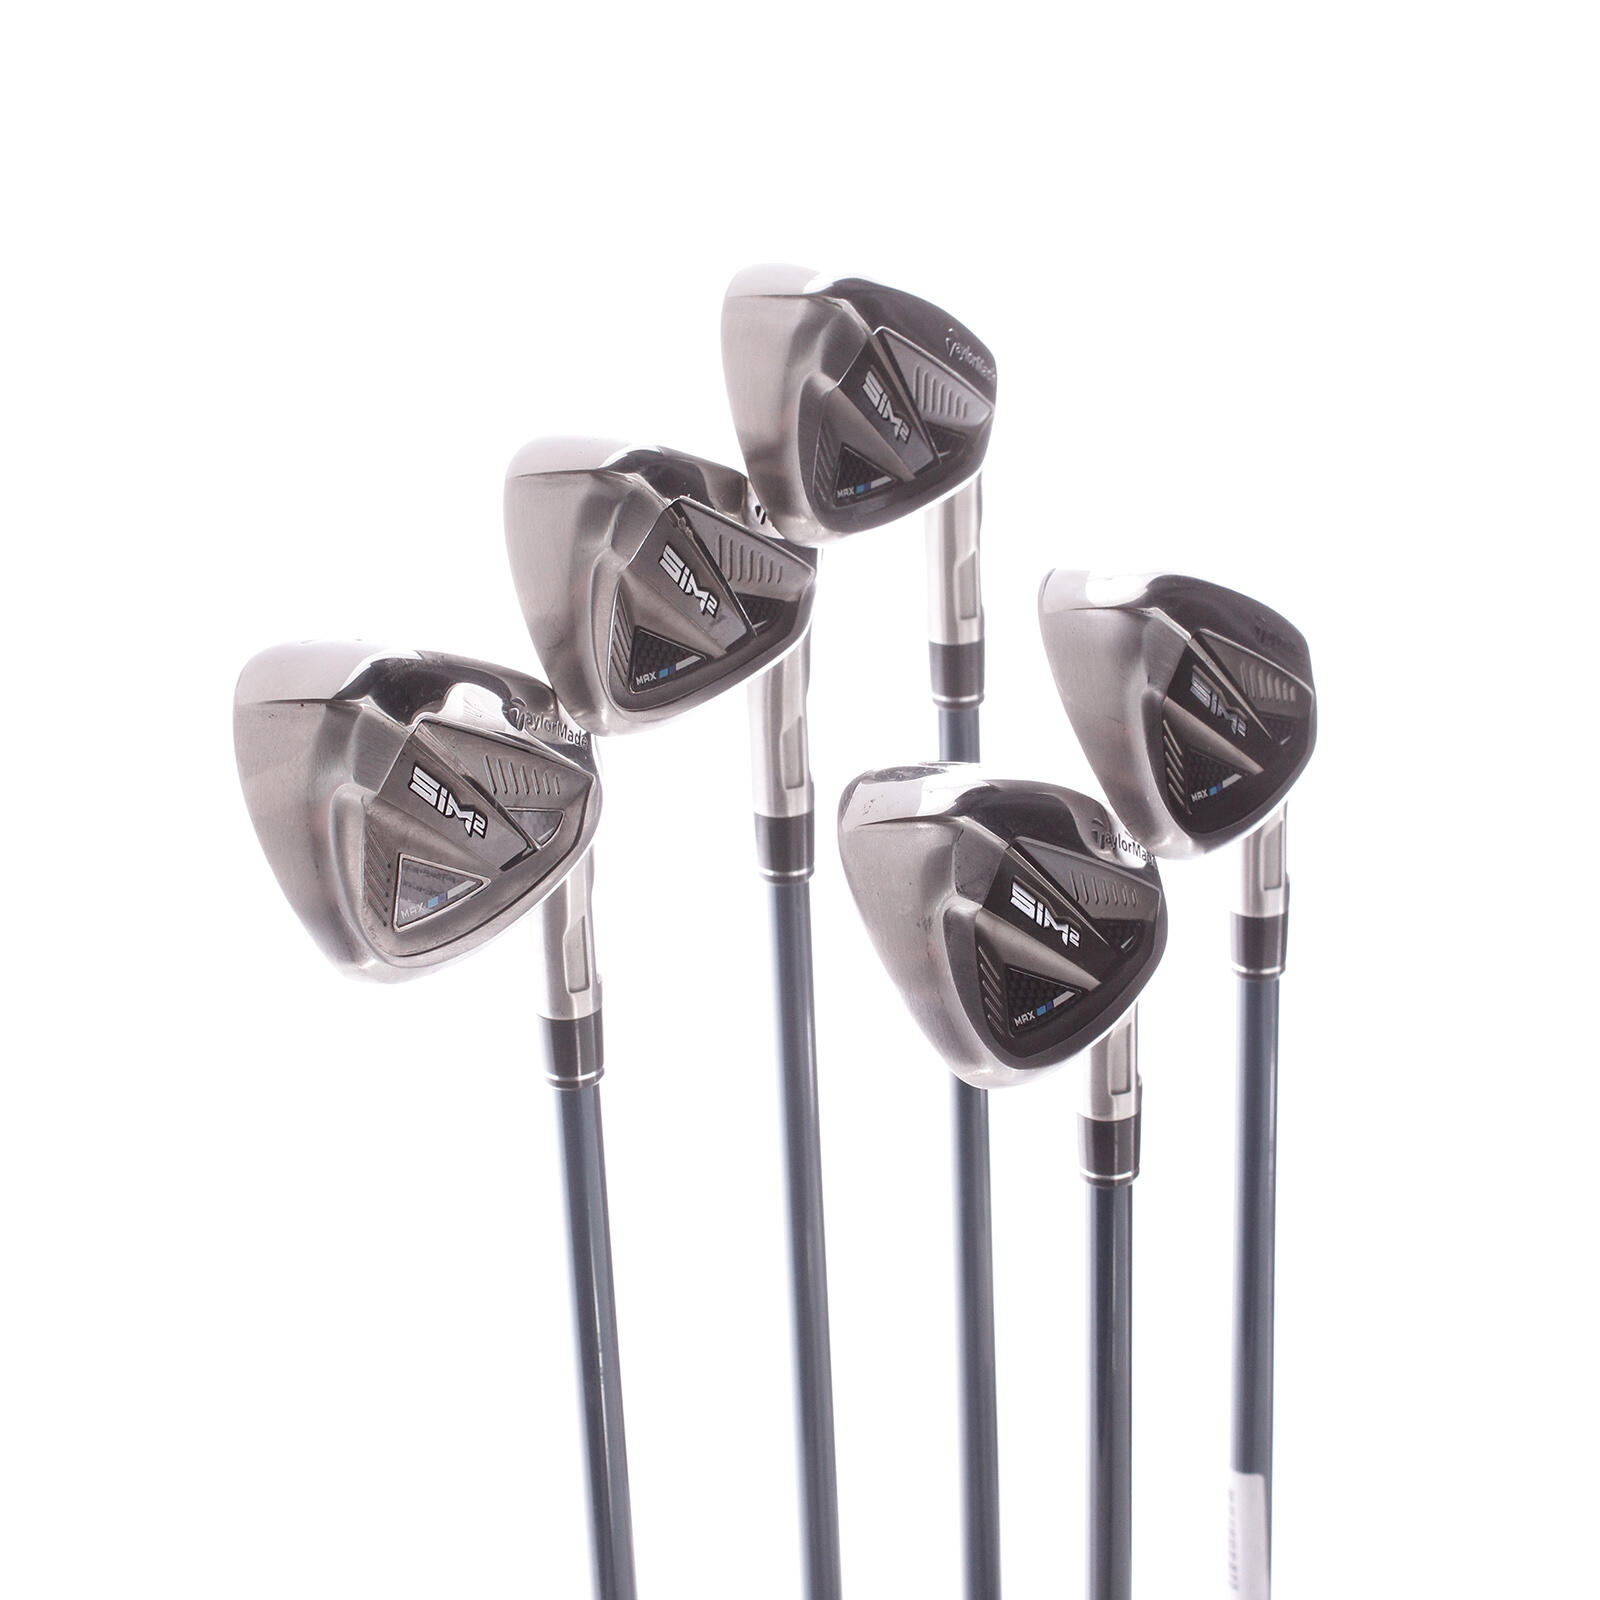 USED - Iron Set 6-PW TaylorMade Sim2 Max Graphite Shaft Right Handed - GRADE B 2/7